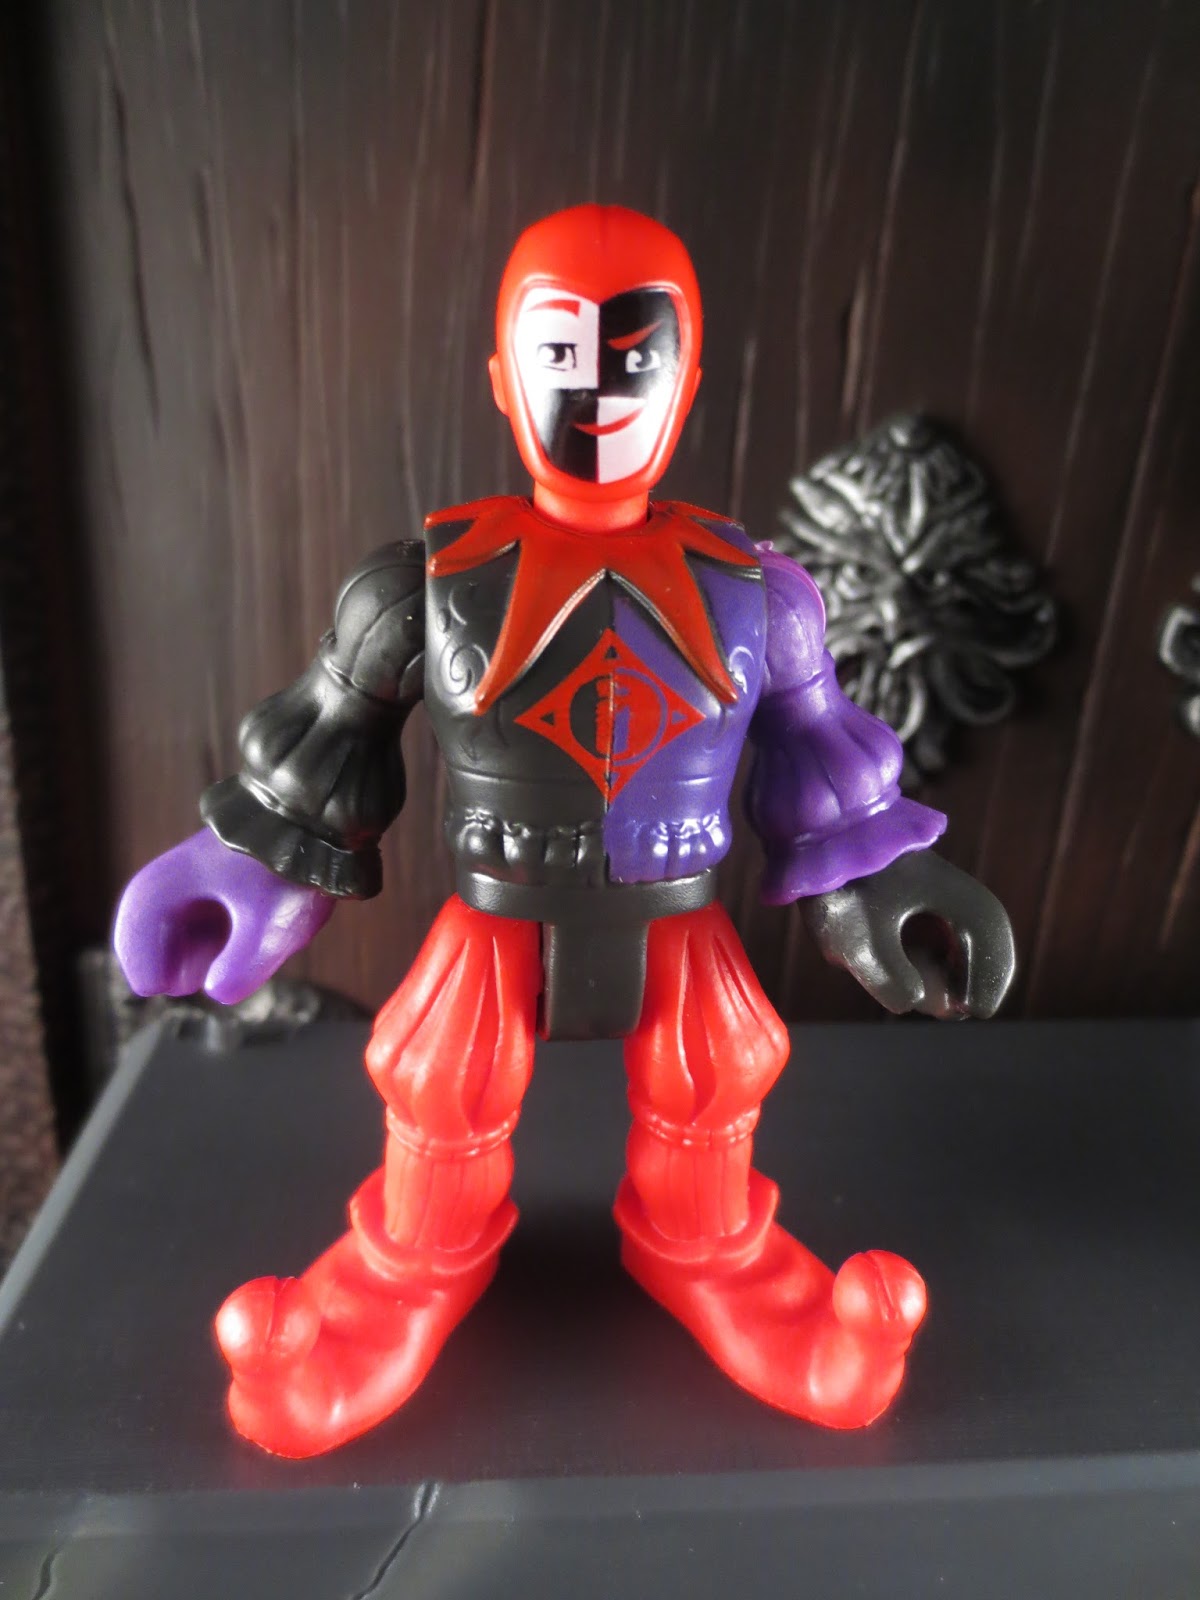 Action Figure Barbecue Action Figure Review Jester From Imaginext